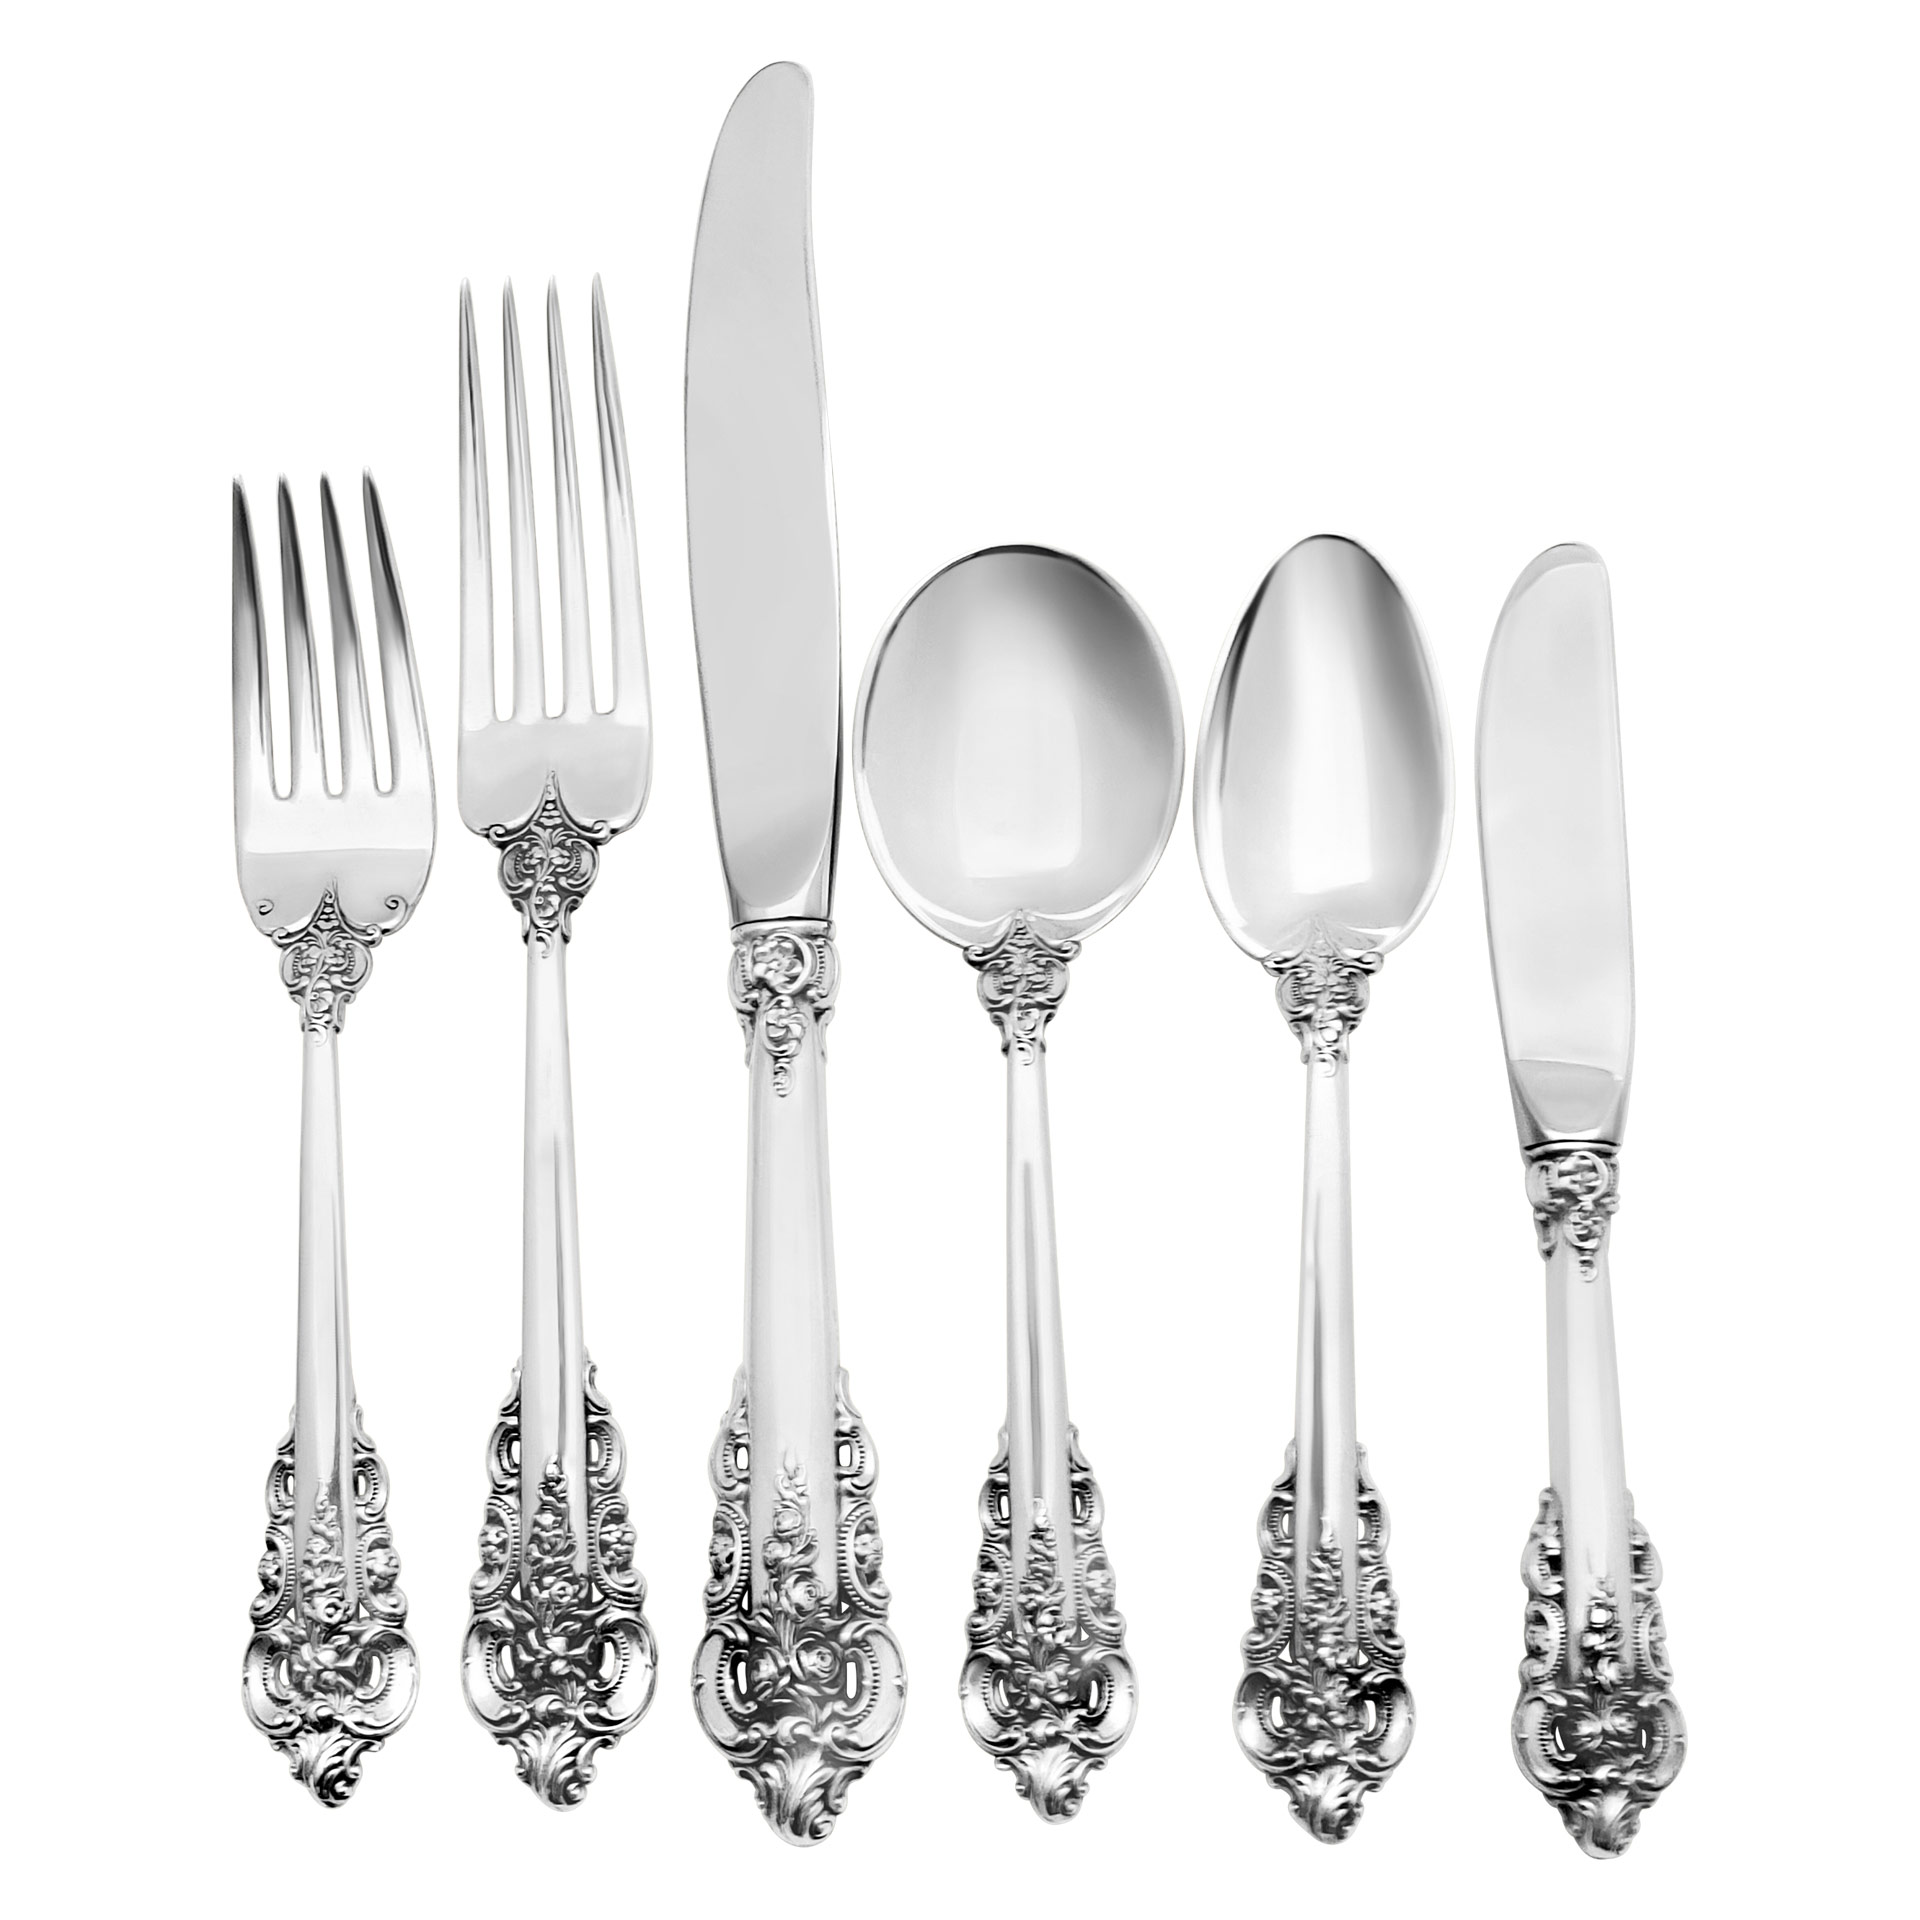 "GRANDE BAROQUE" Sterling Silver Flatware- Patented in 1941 by Wallace. 6 place setting for 10 with 10 serving pieces- Over 3000 grams of sterling silver. image 1